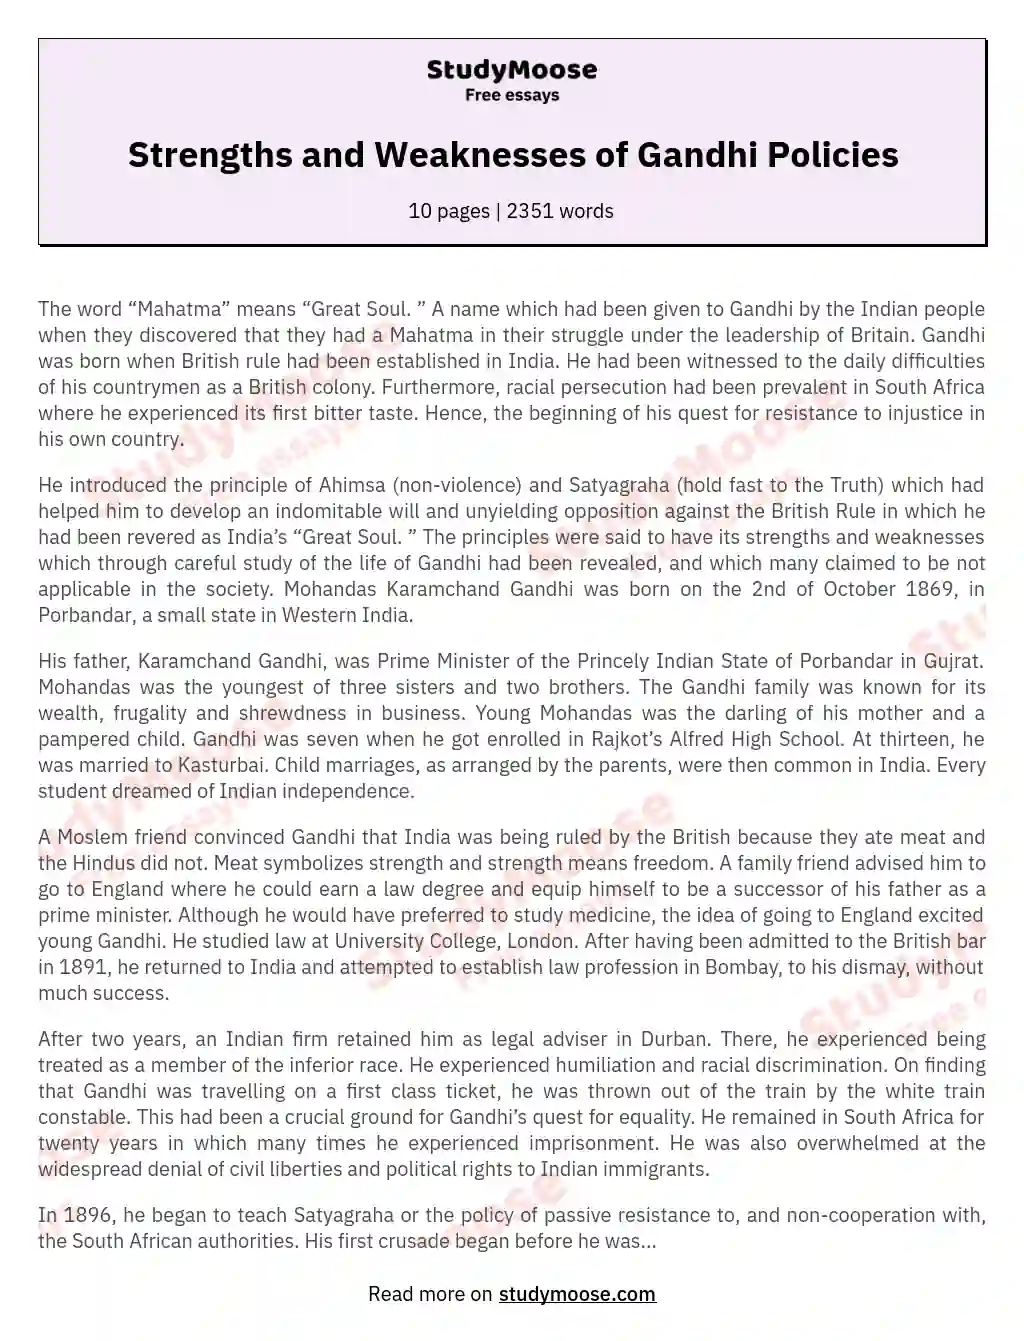 Strengths and Weaknesses of Gandhi Policies essay